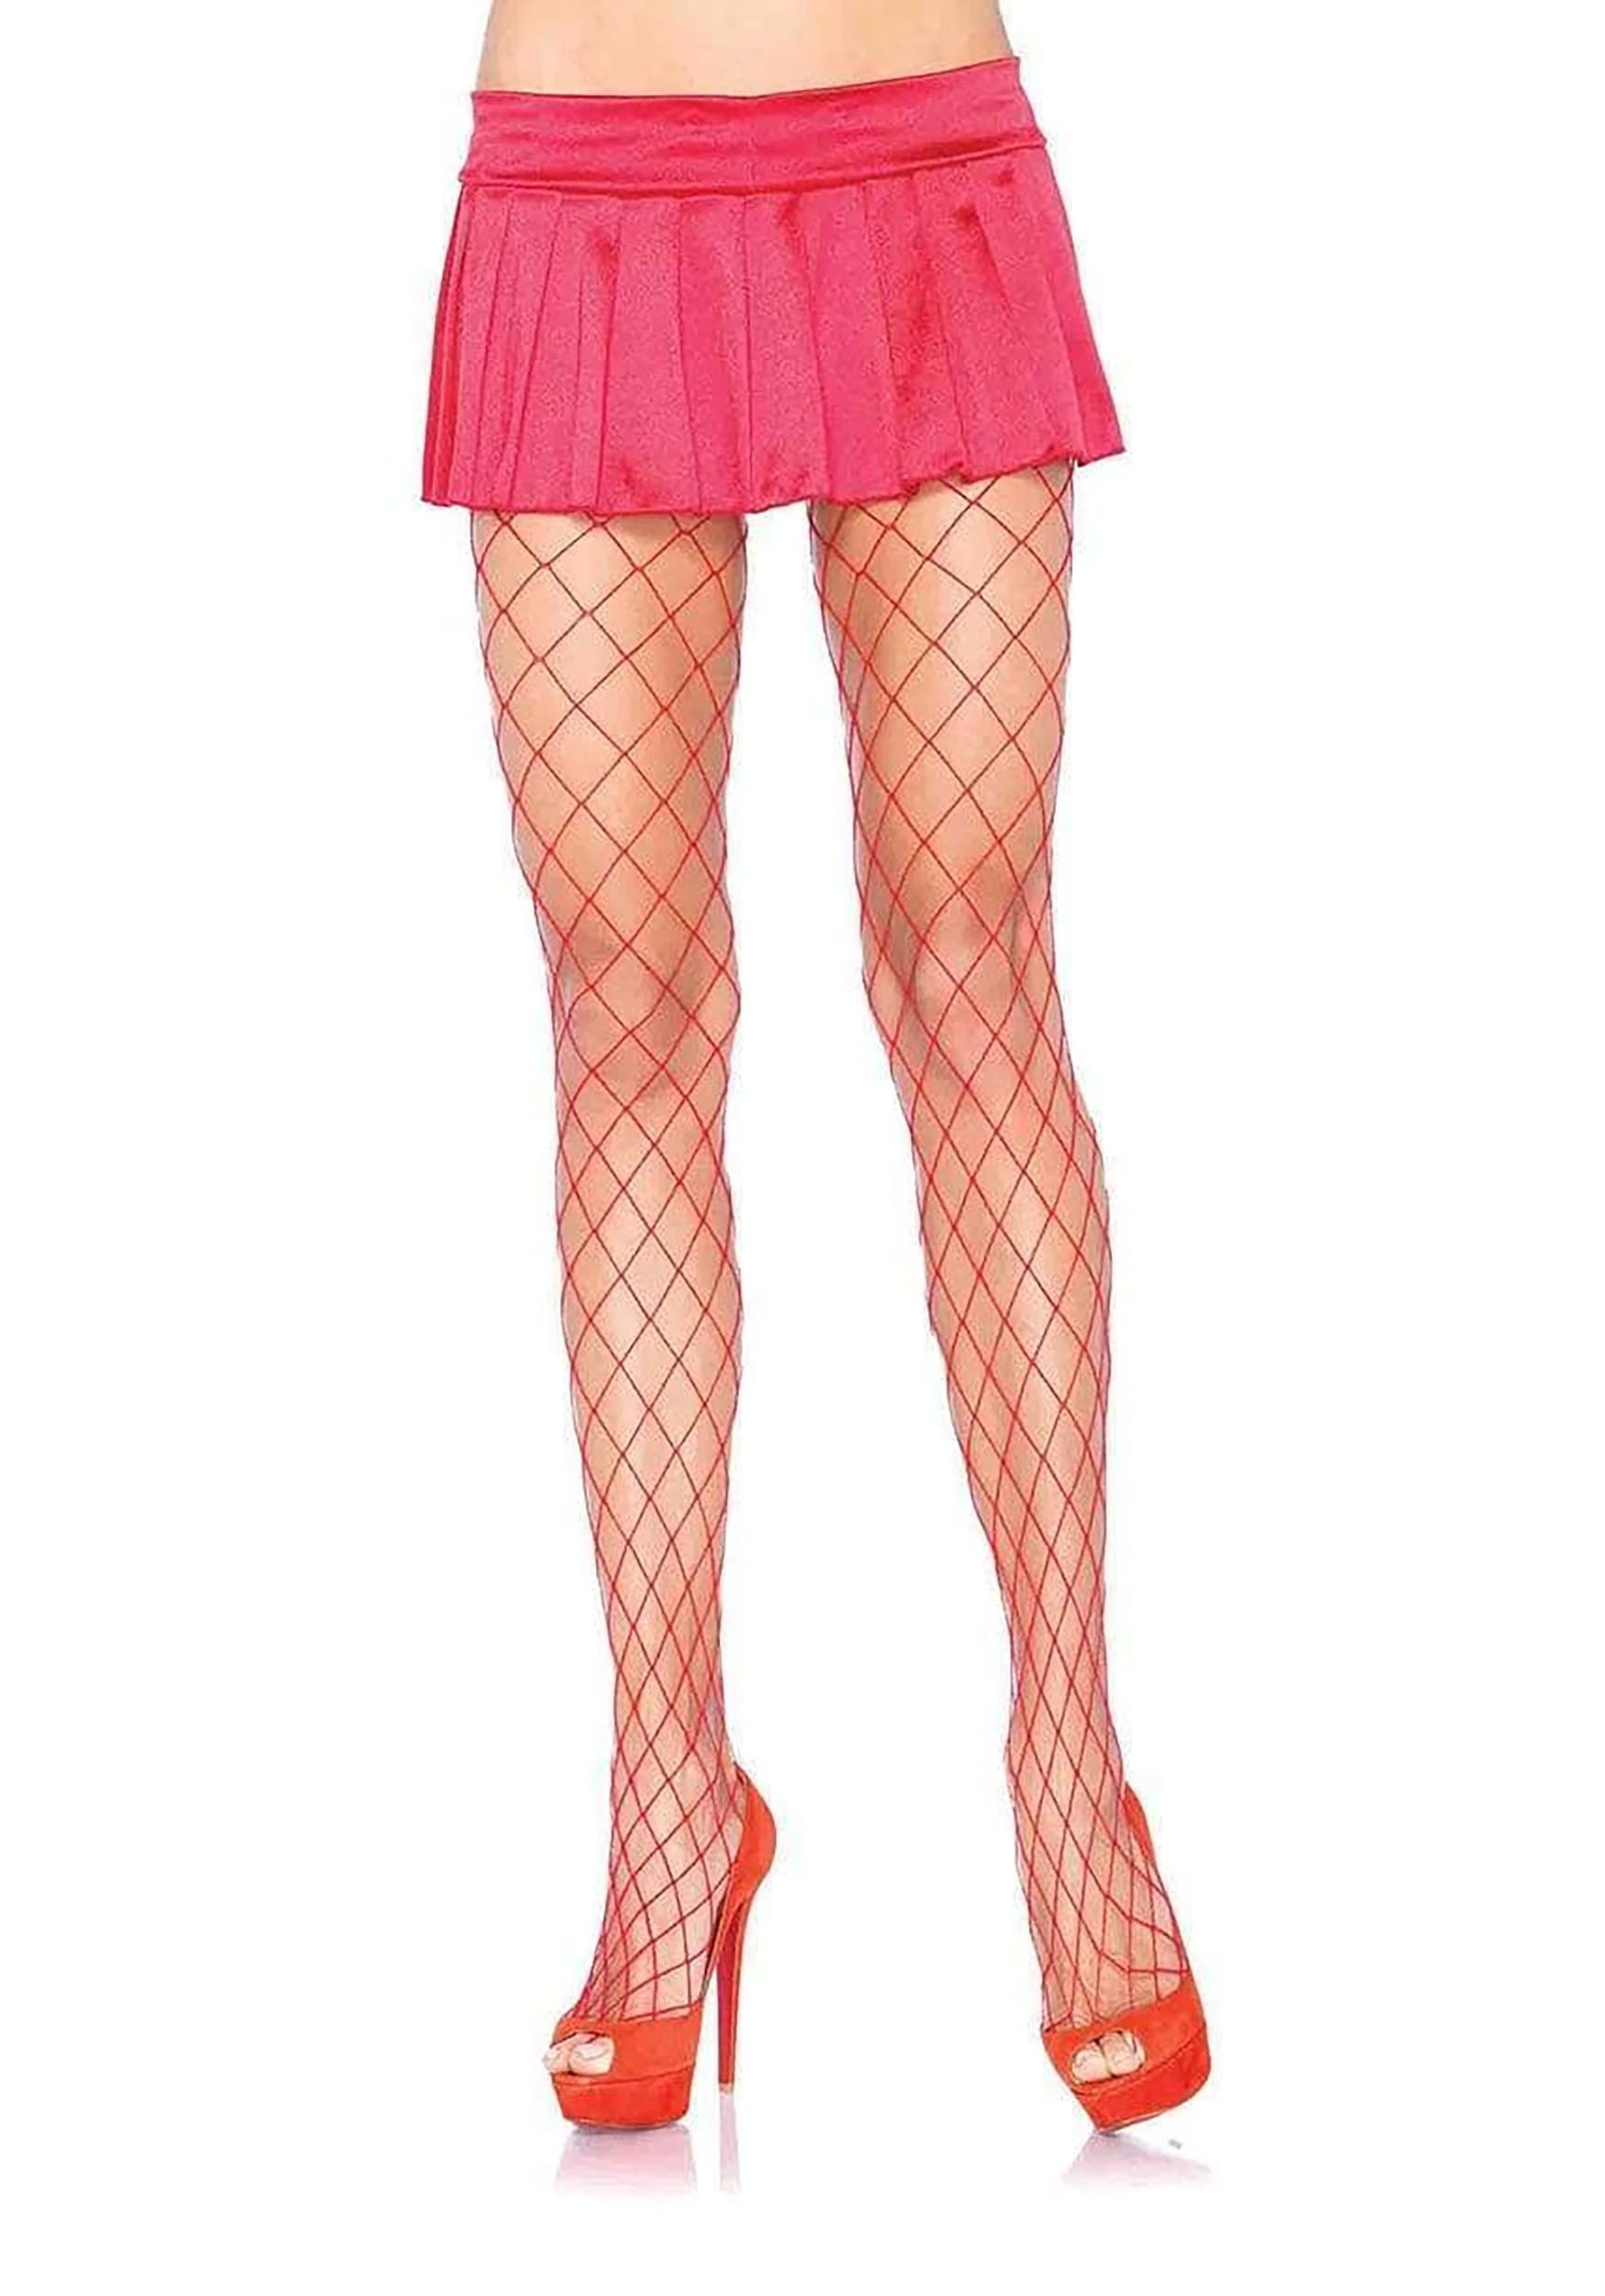 Women’s Red Fence Net Tights